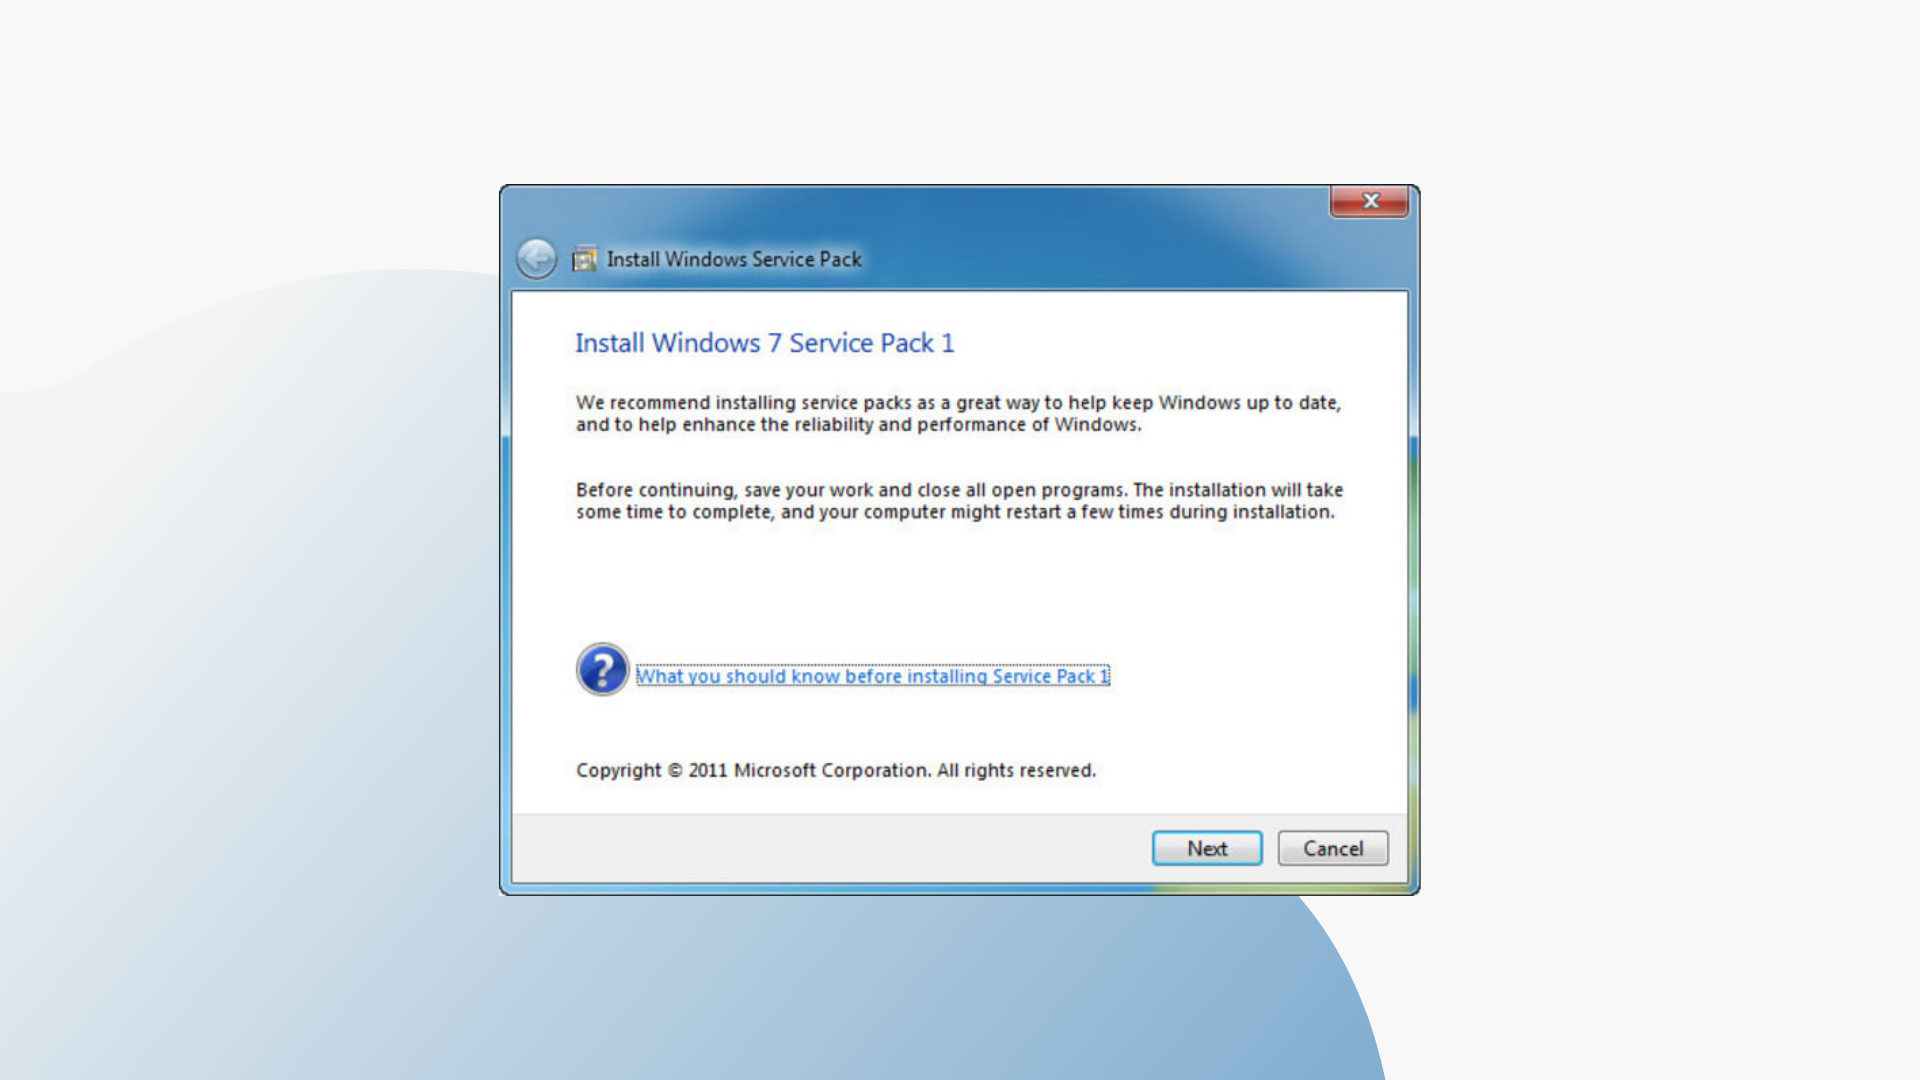 Service Pack 1 for Windows 7 and its Features